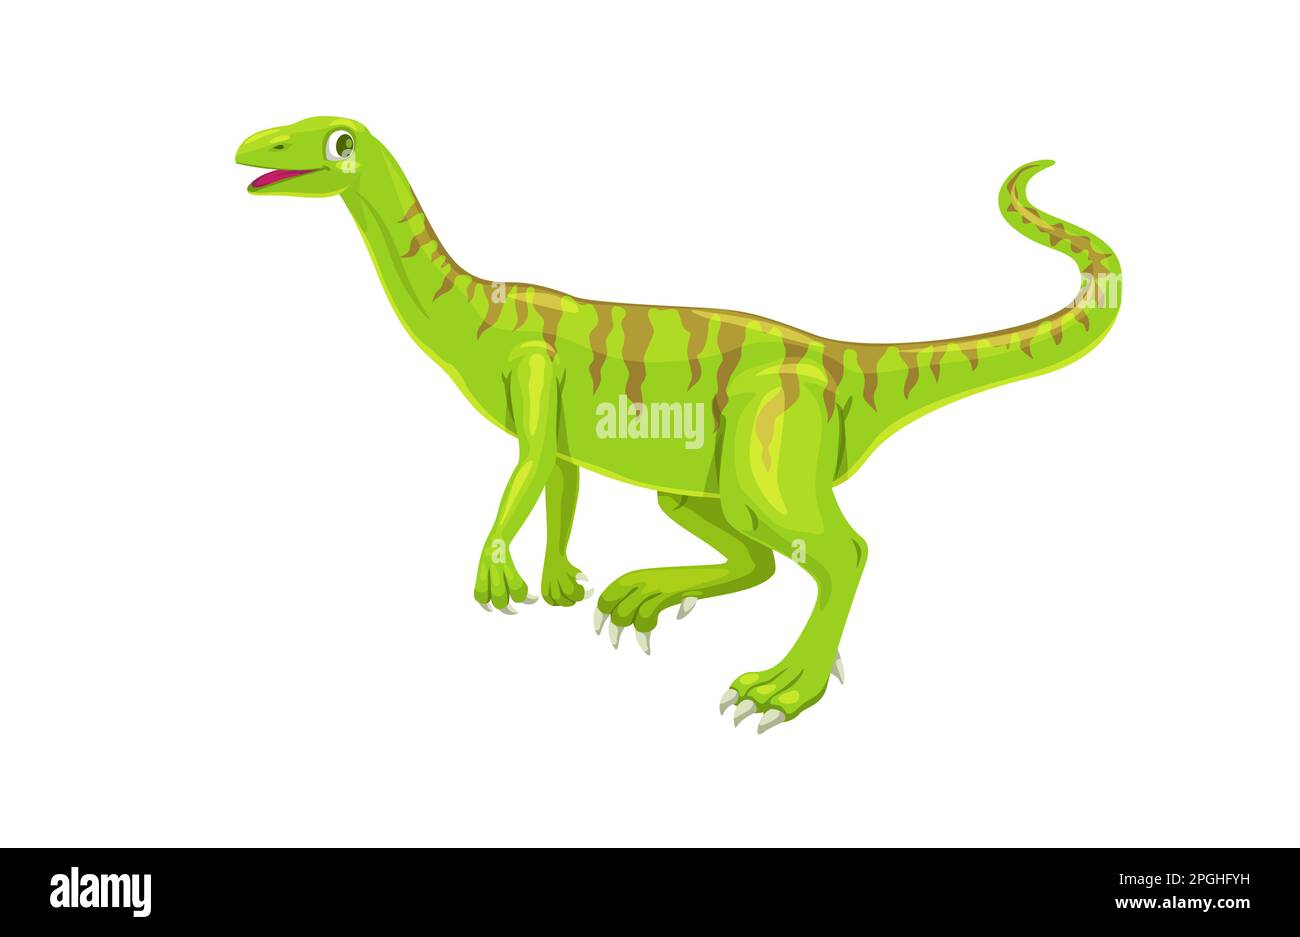 Cartoon elaphrosaurus dinosaur character. Isolated vector genus of ceratosaurian theropod dino that lived during the Late Jurassic Period. Prehistoric Stock Vector